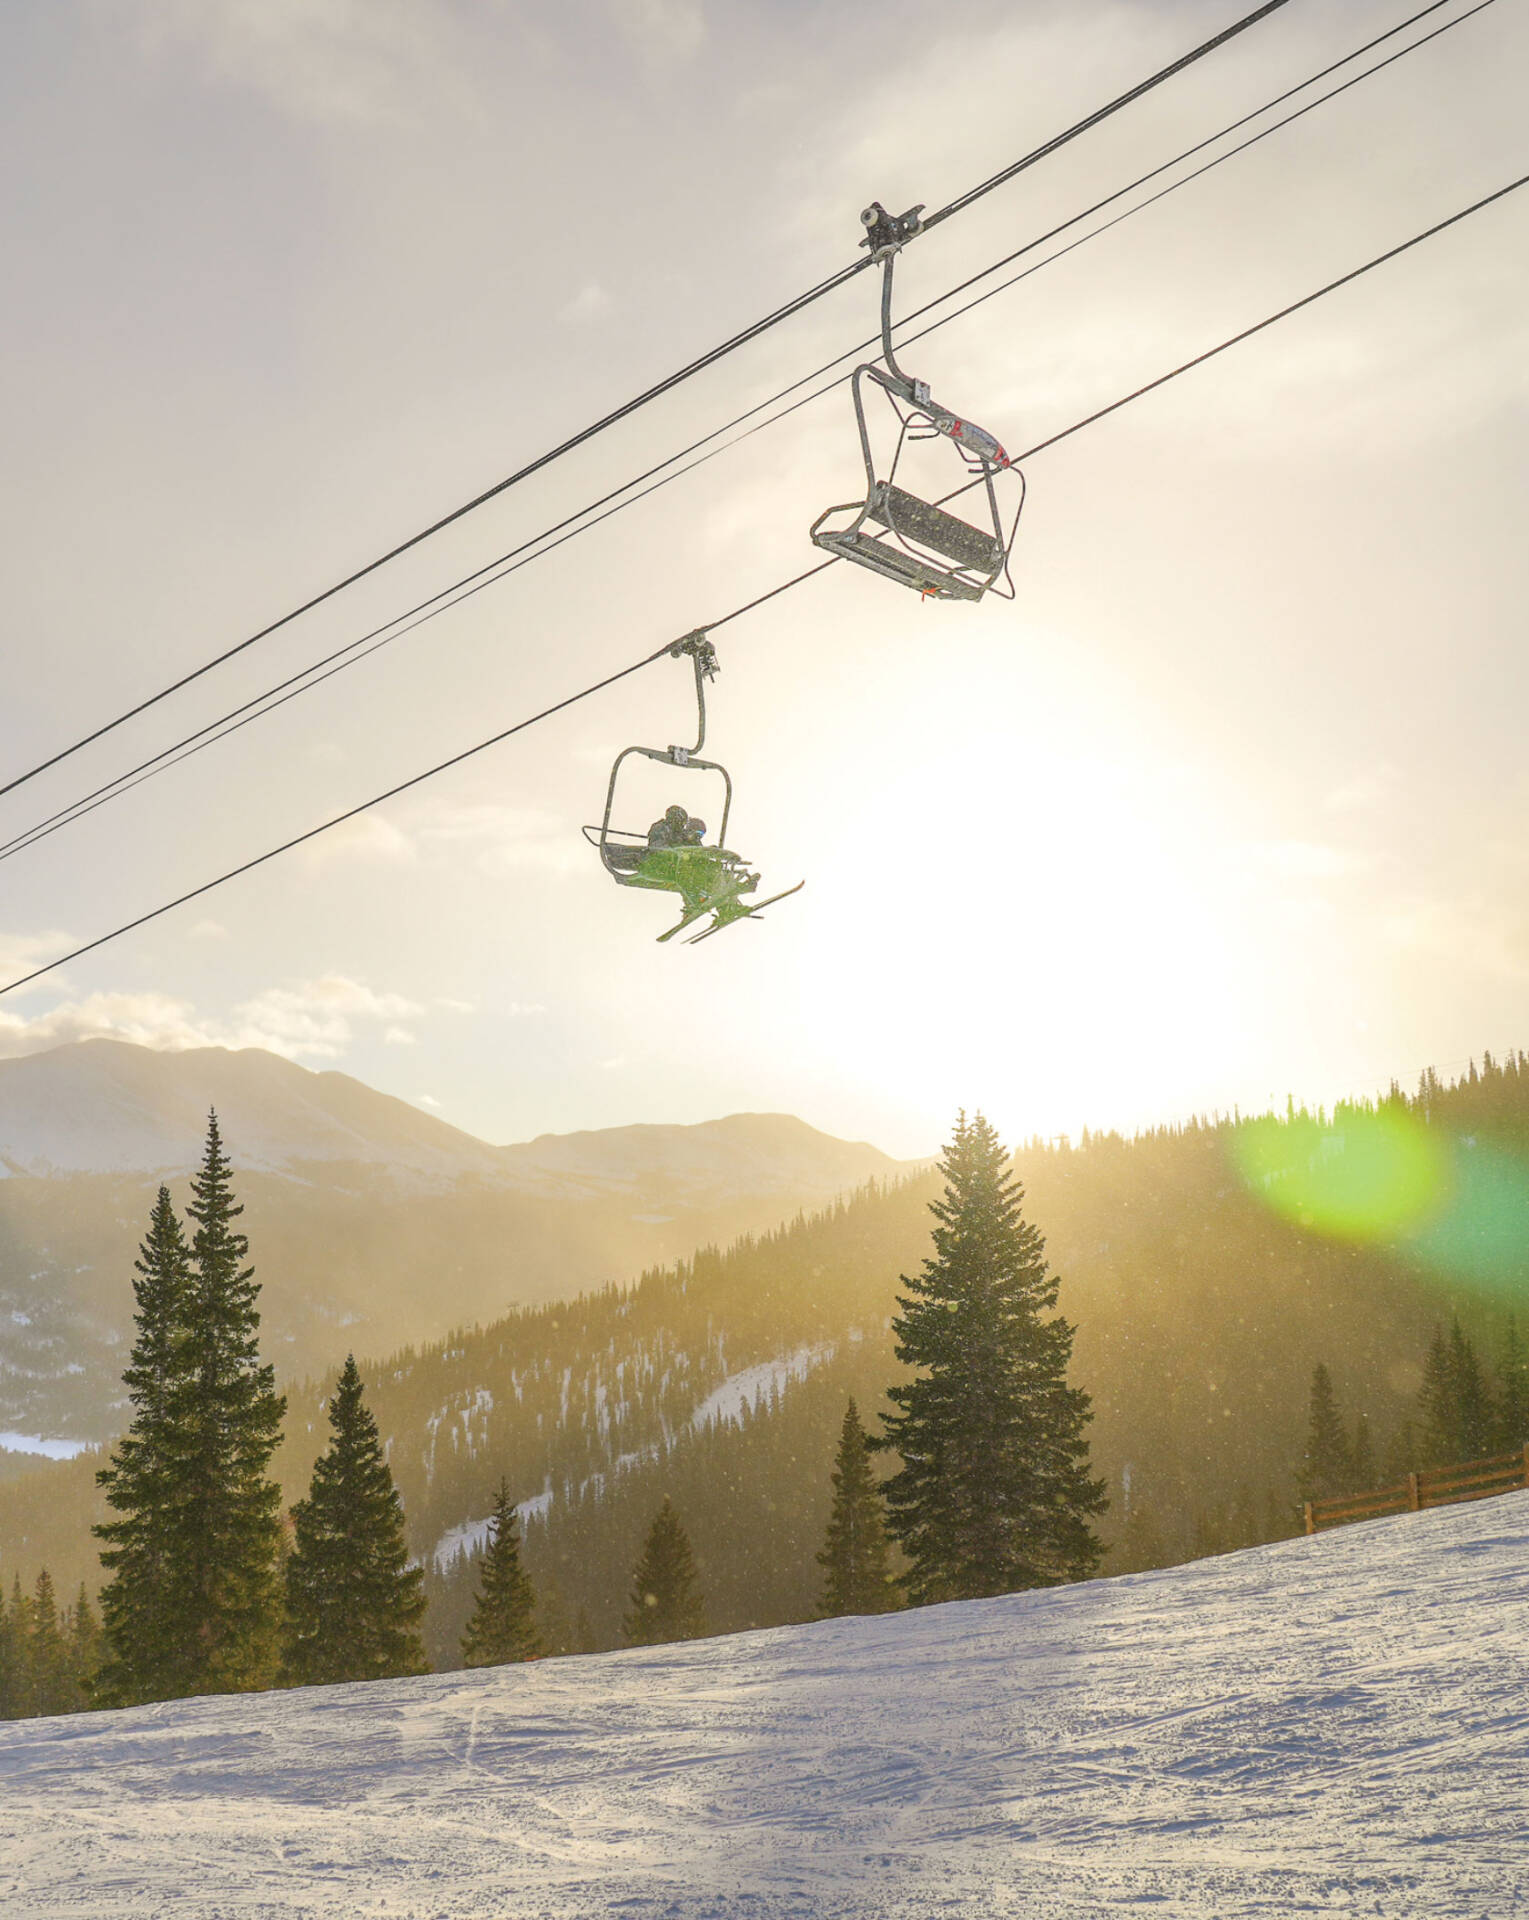 Skiers on chairlift with sunset in background